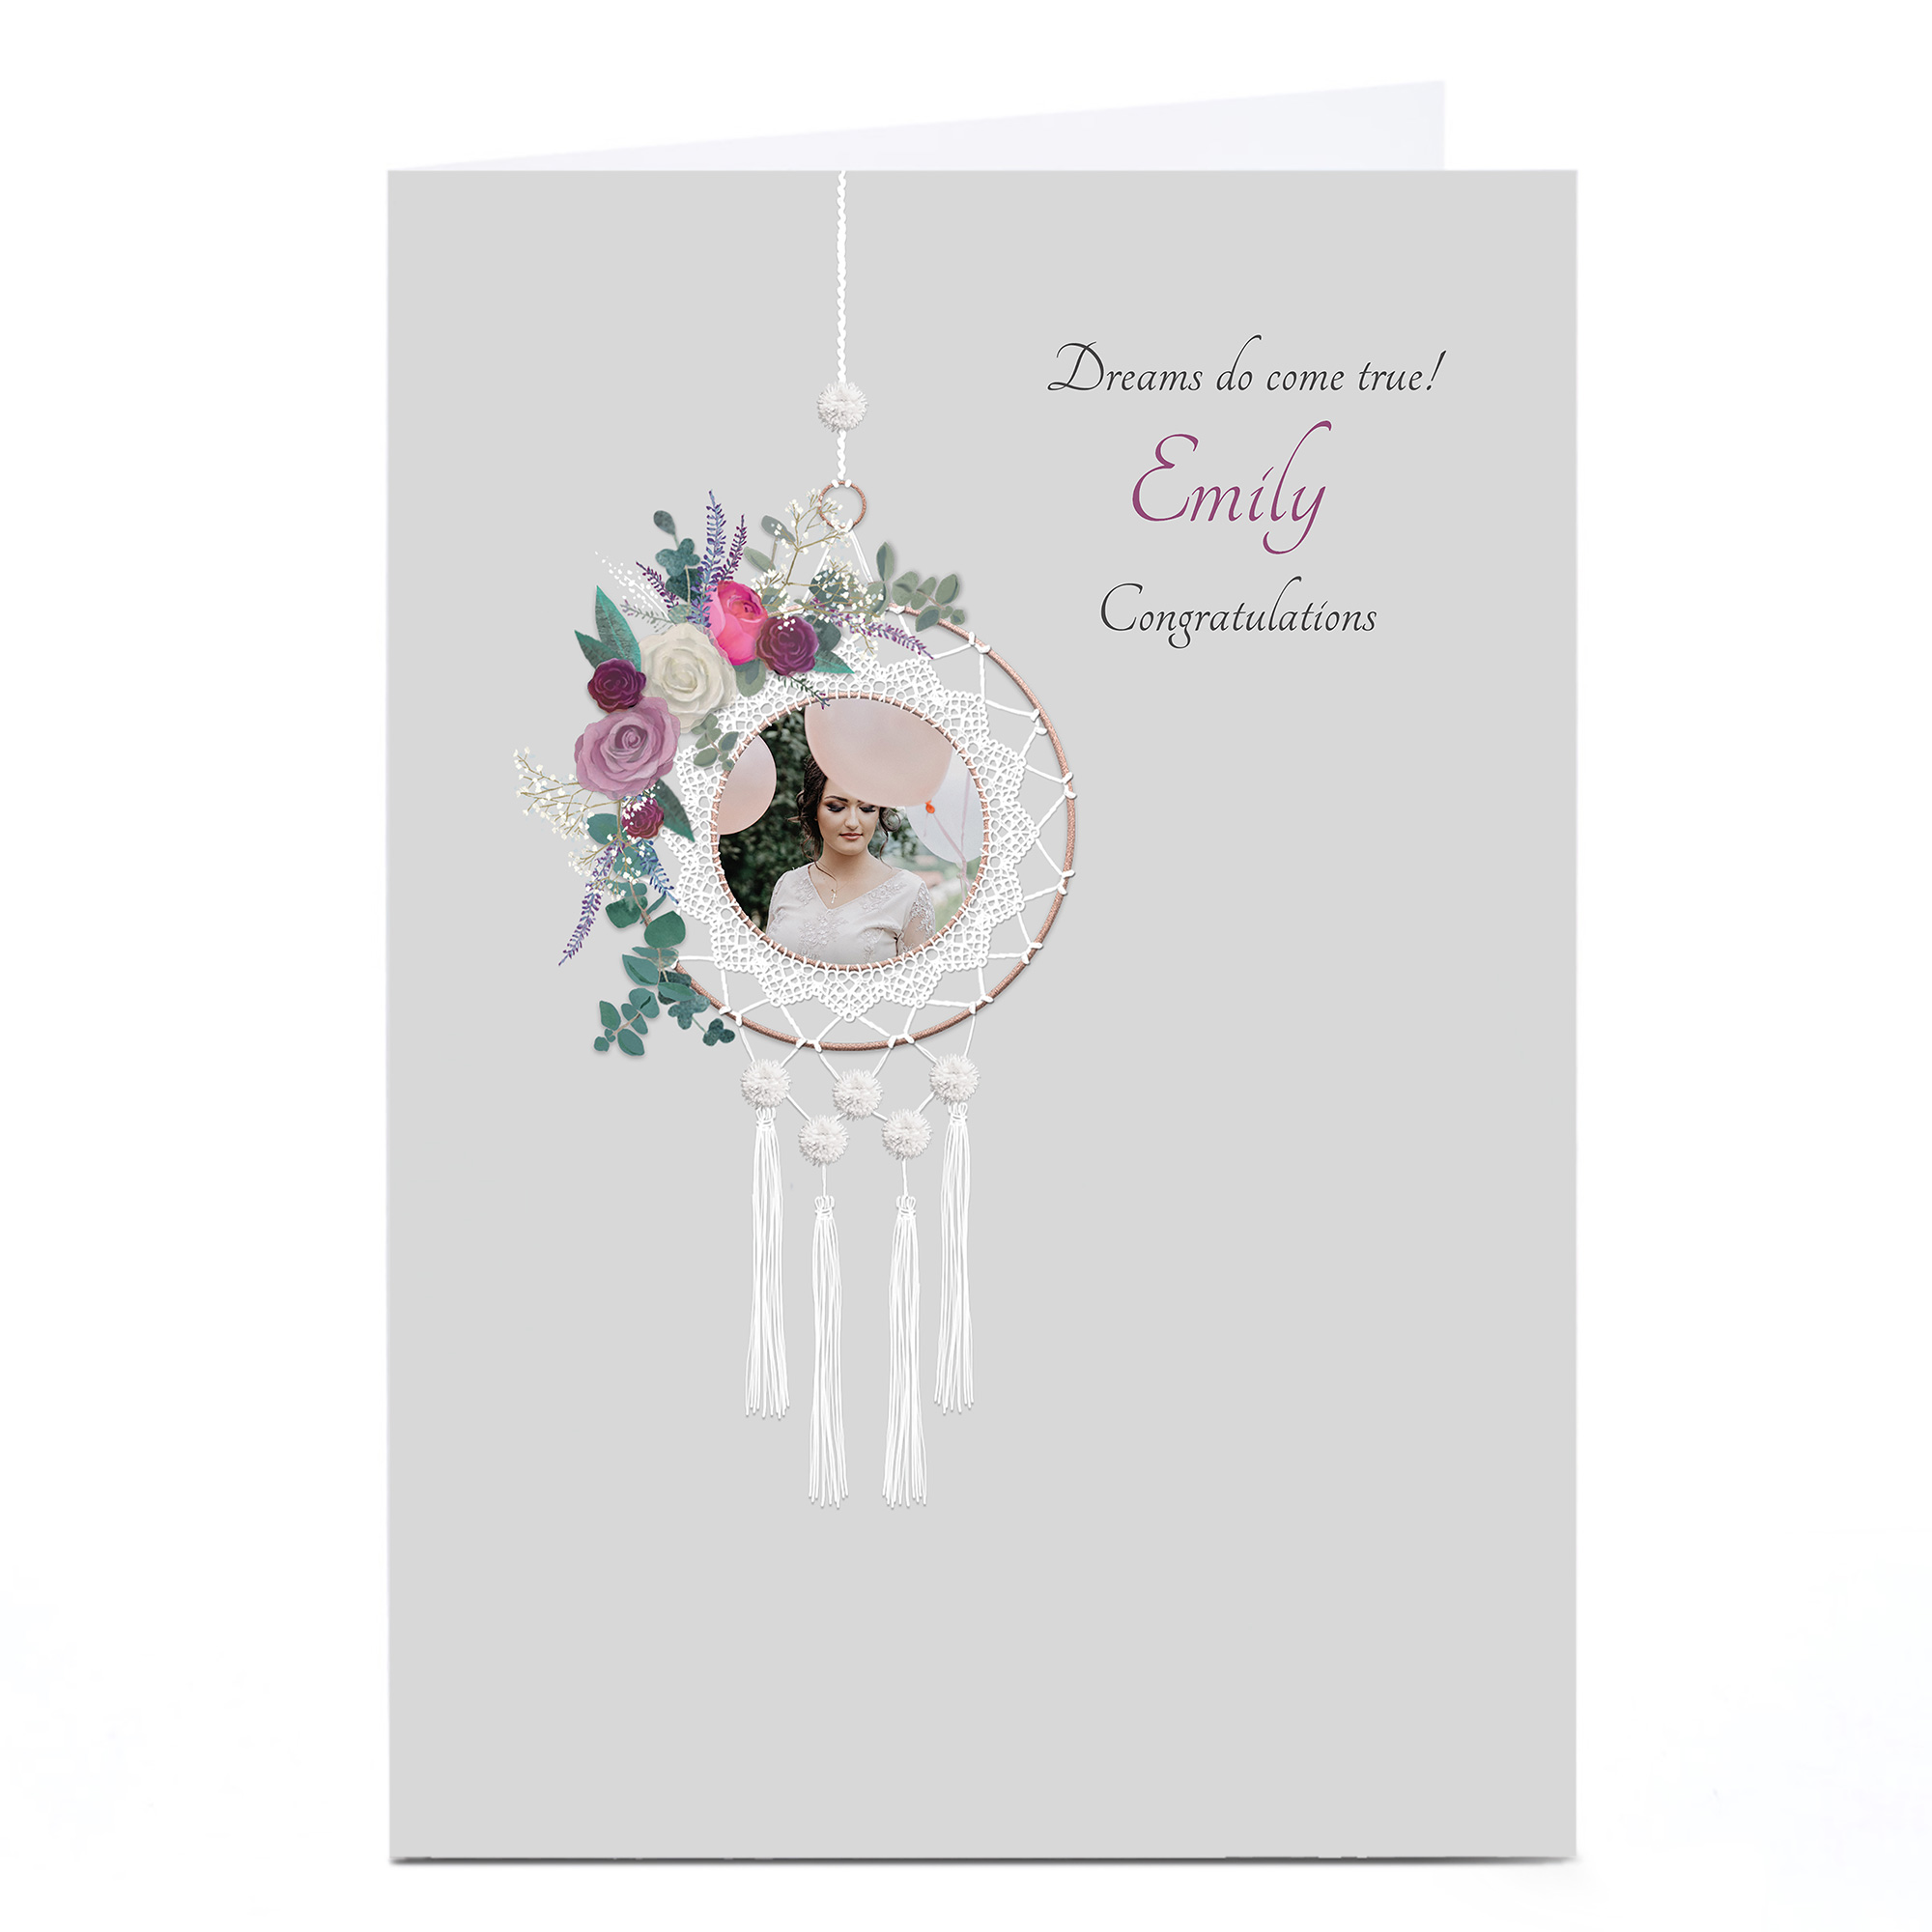 Personalised Kerry Spurling Congratulations Card - Dreamcatcher